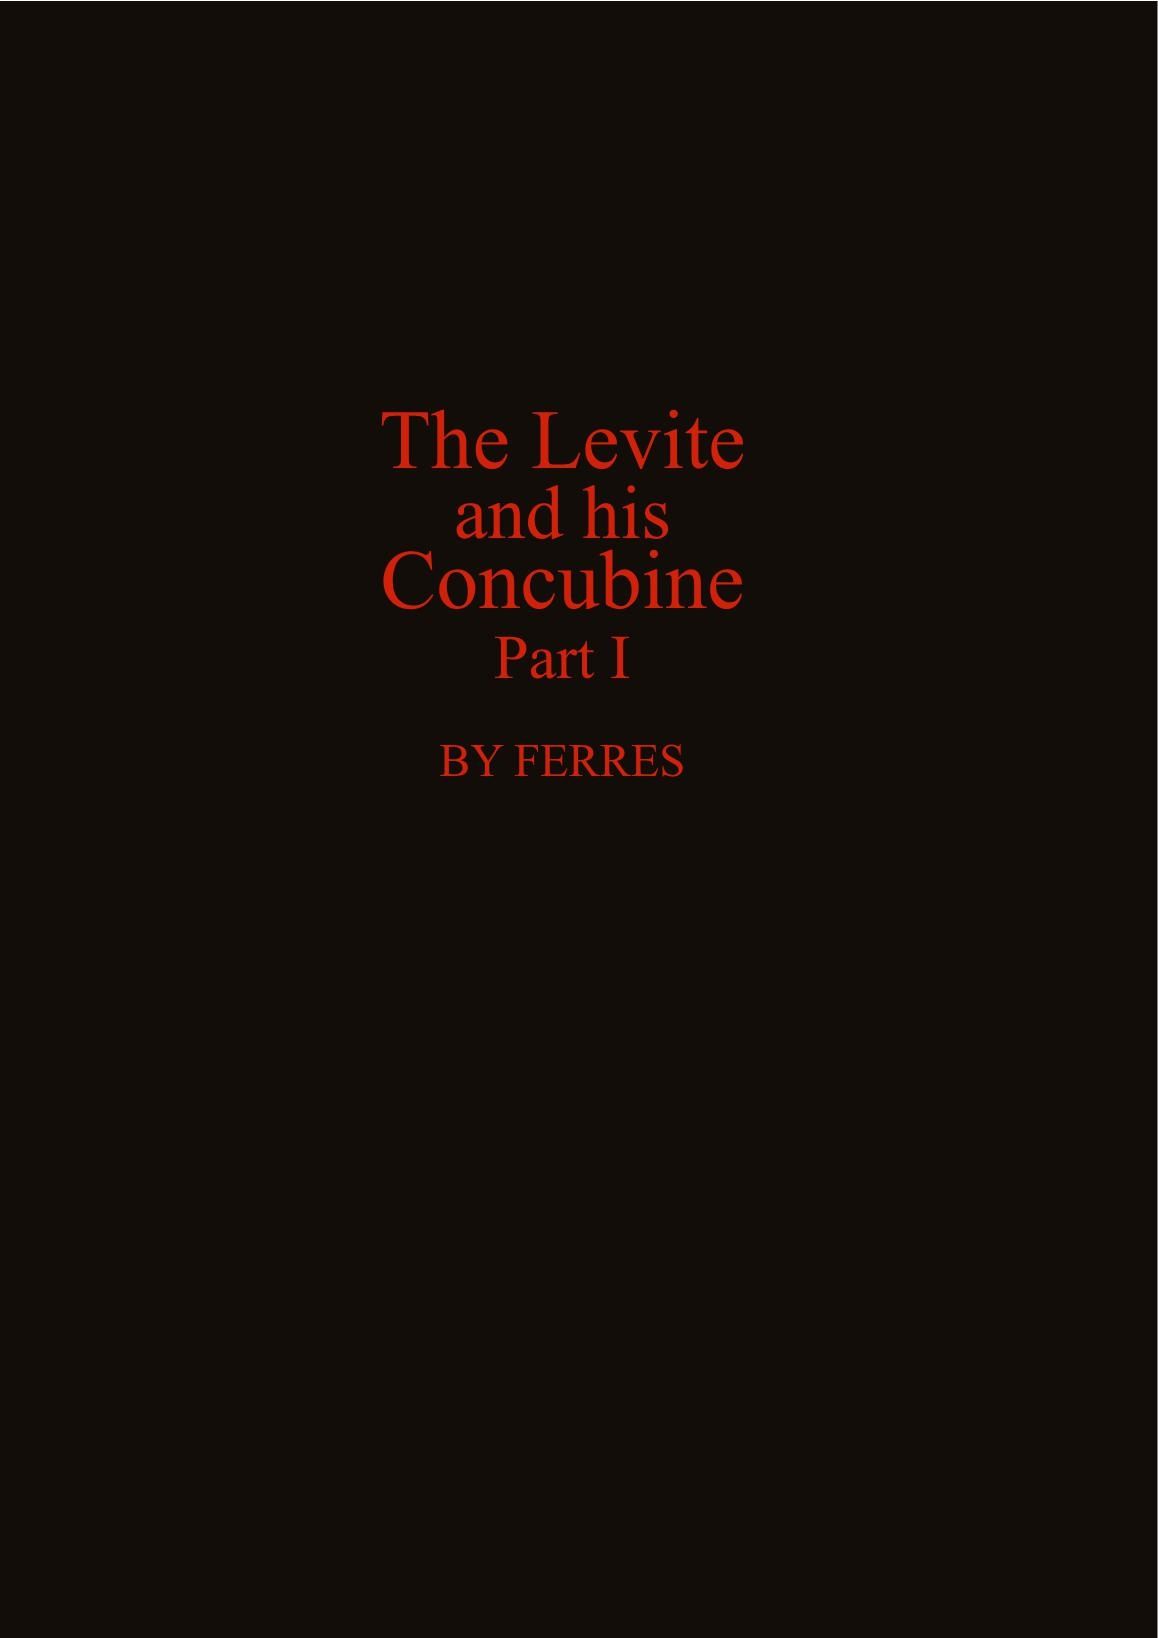 The Levite and His Concubine by Ferres